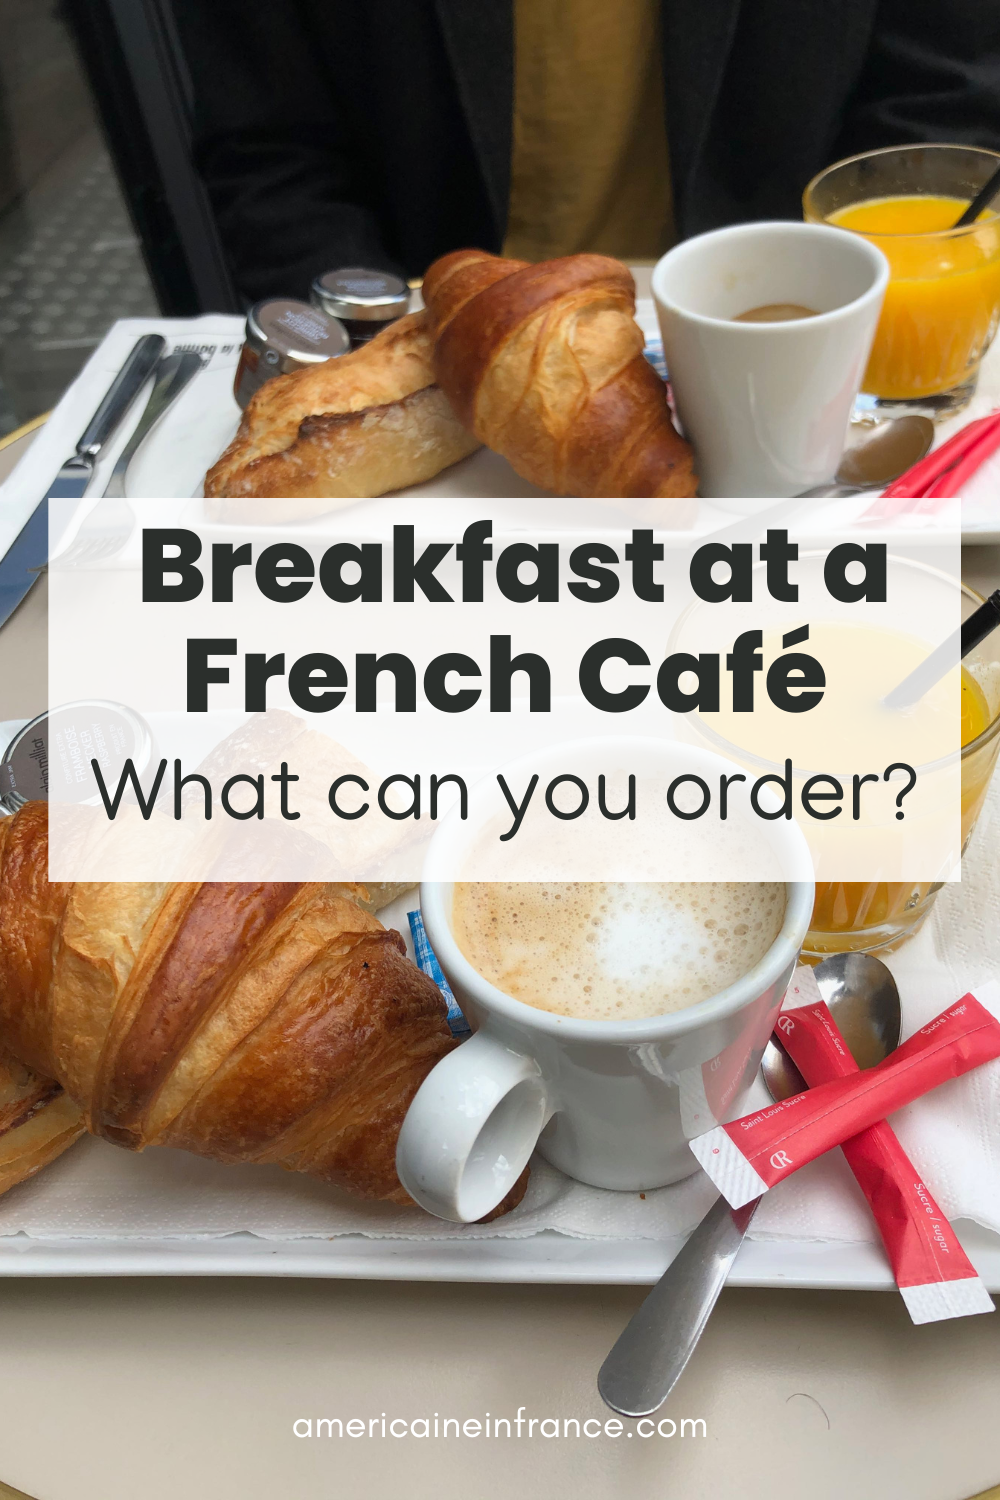 What Do French People Typically Eat for Breakfast?